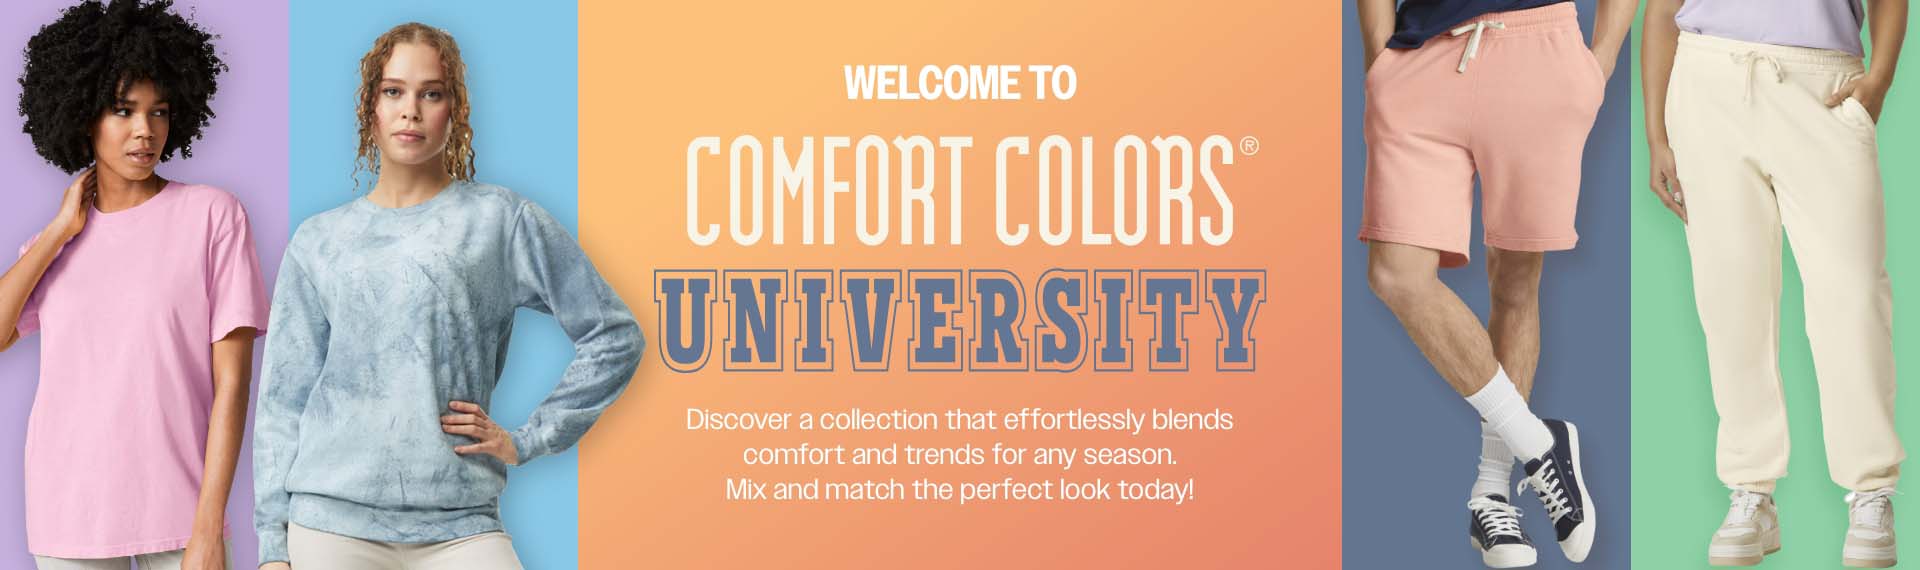 Welcome to Comfort Colors University